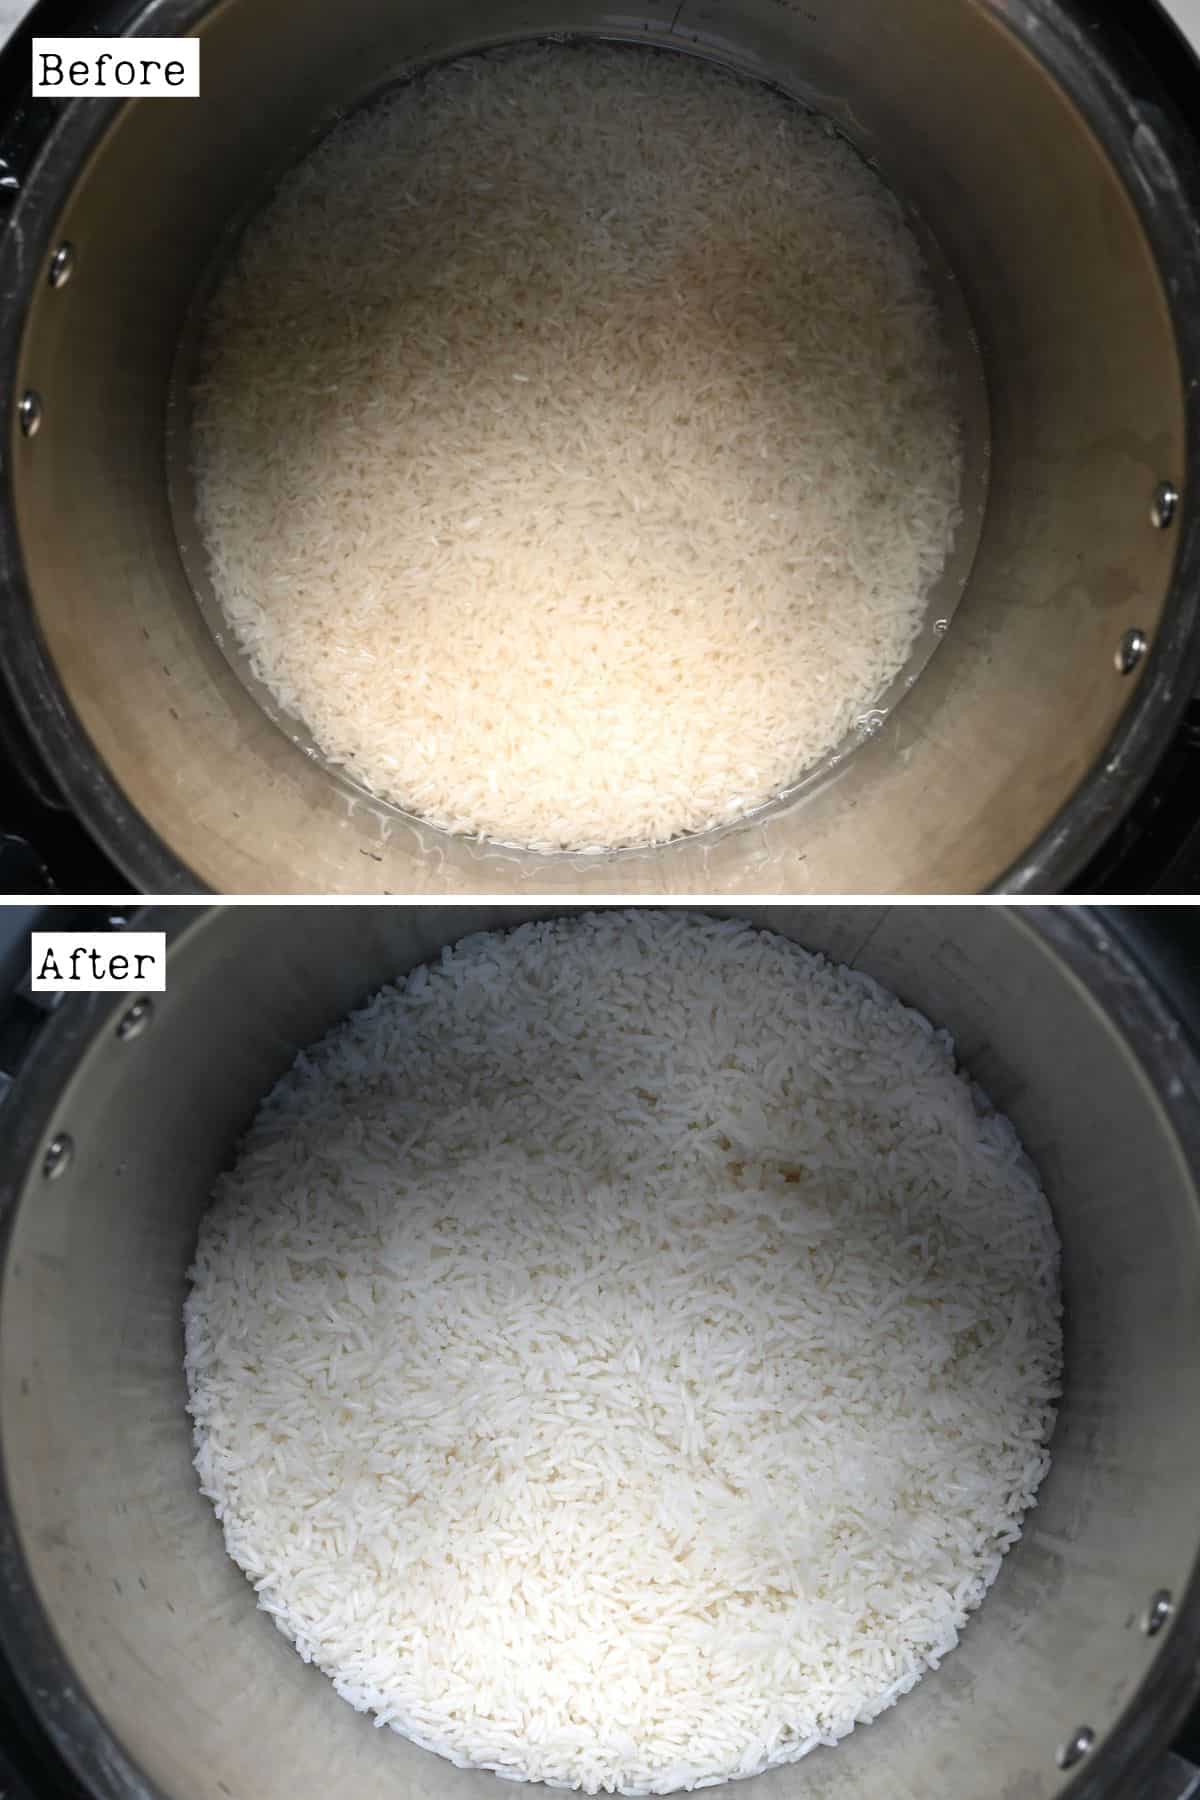 Before and after cooking jasmine rice in an instant pot